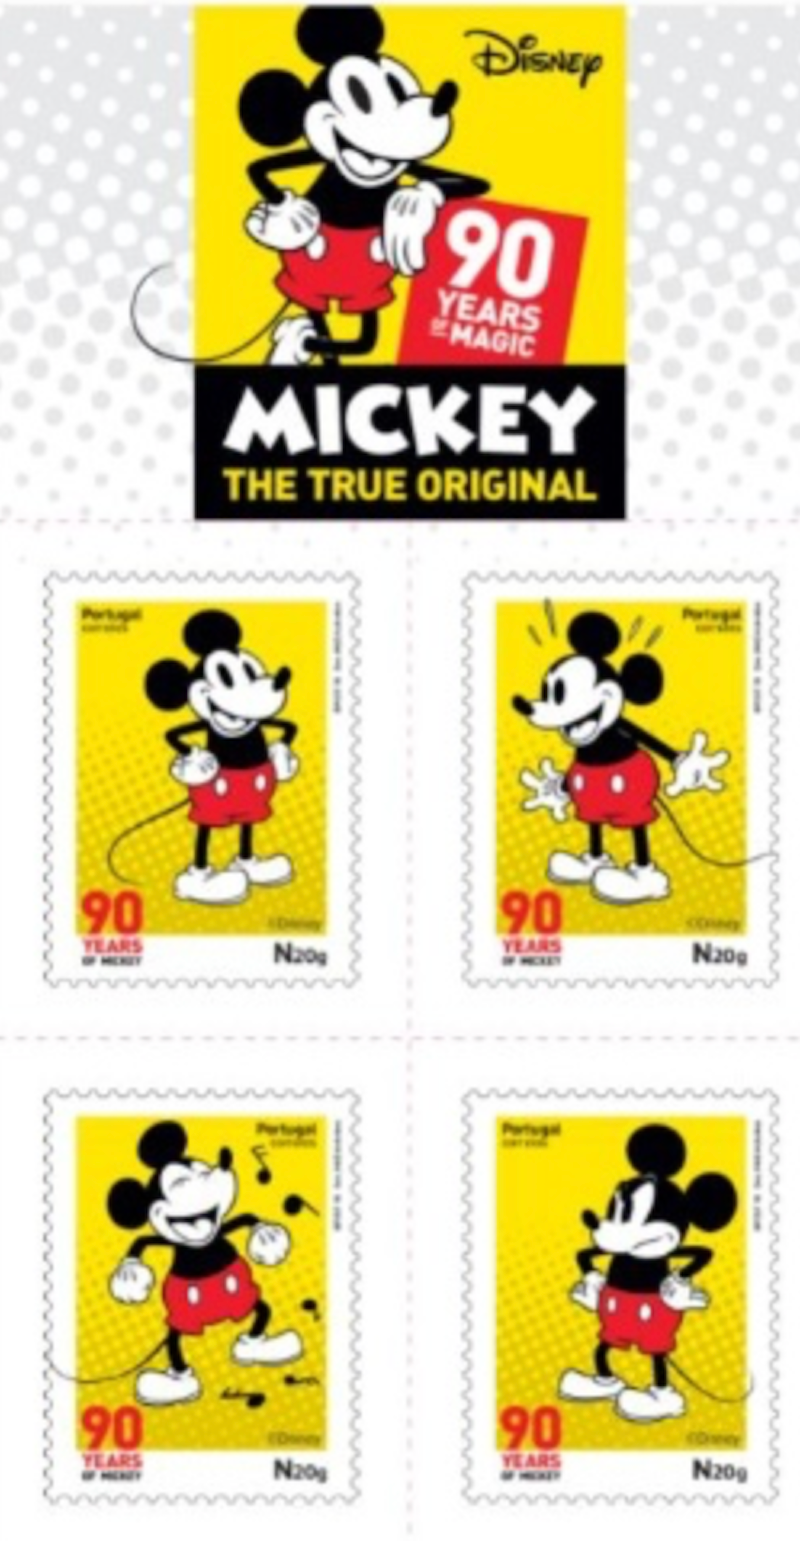 Disney Portugal 2018 90 Years Mickey booklet auto adhesive MNH New